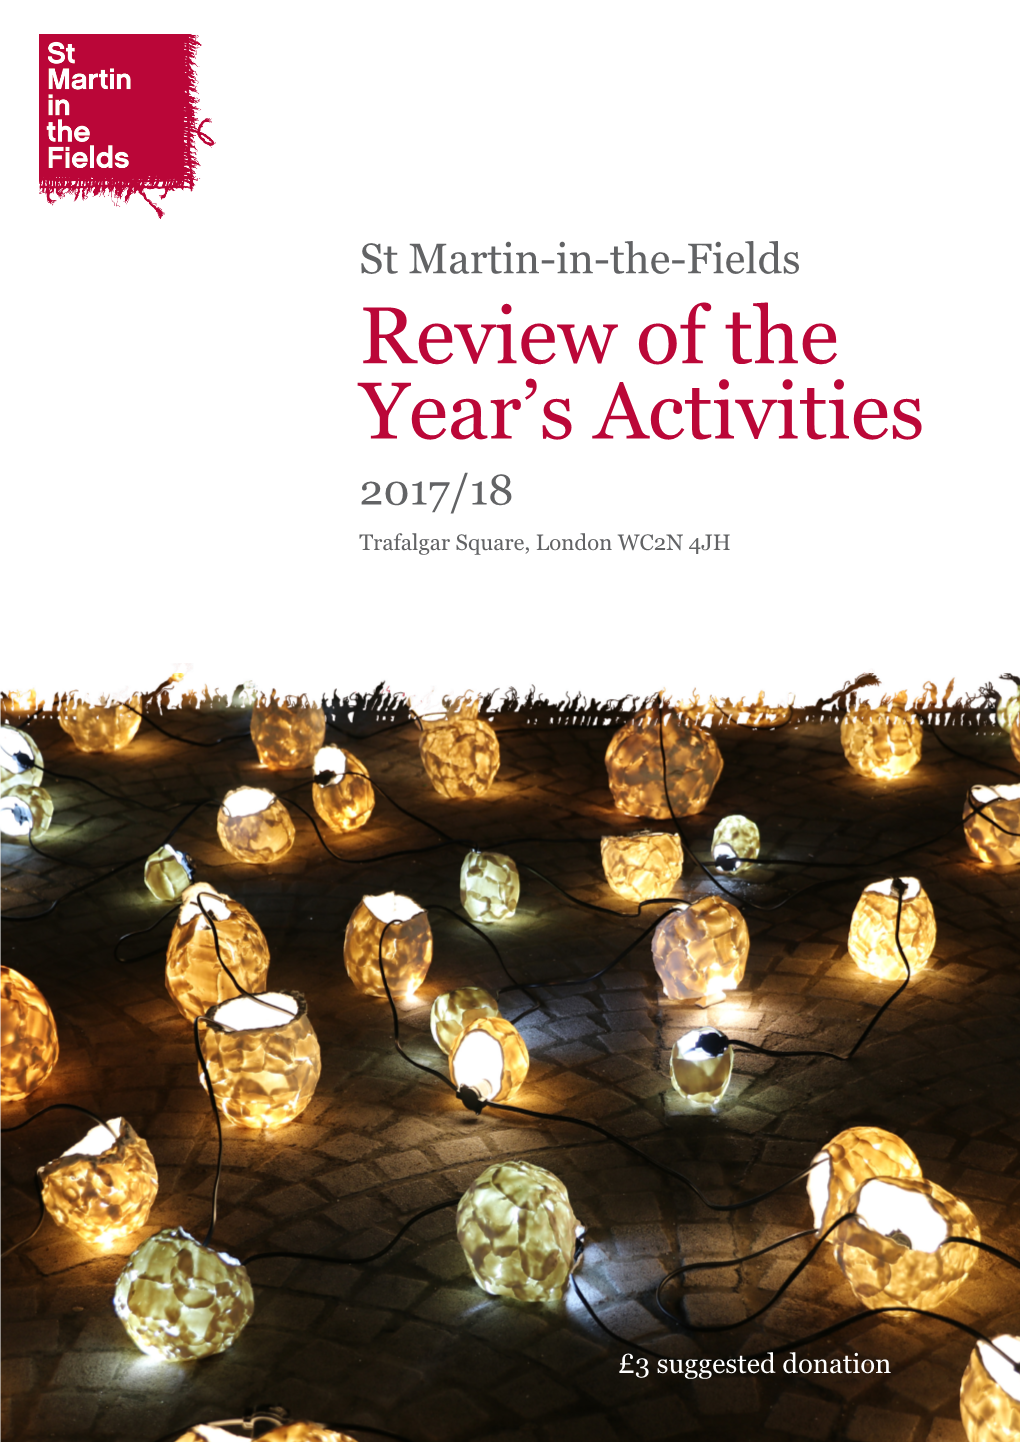 Annual Review of Activities 2016-2017